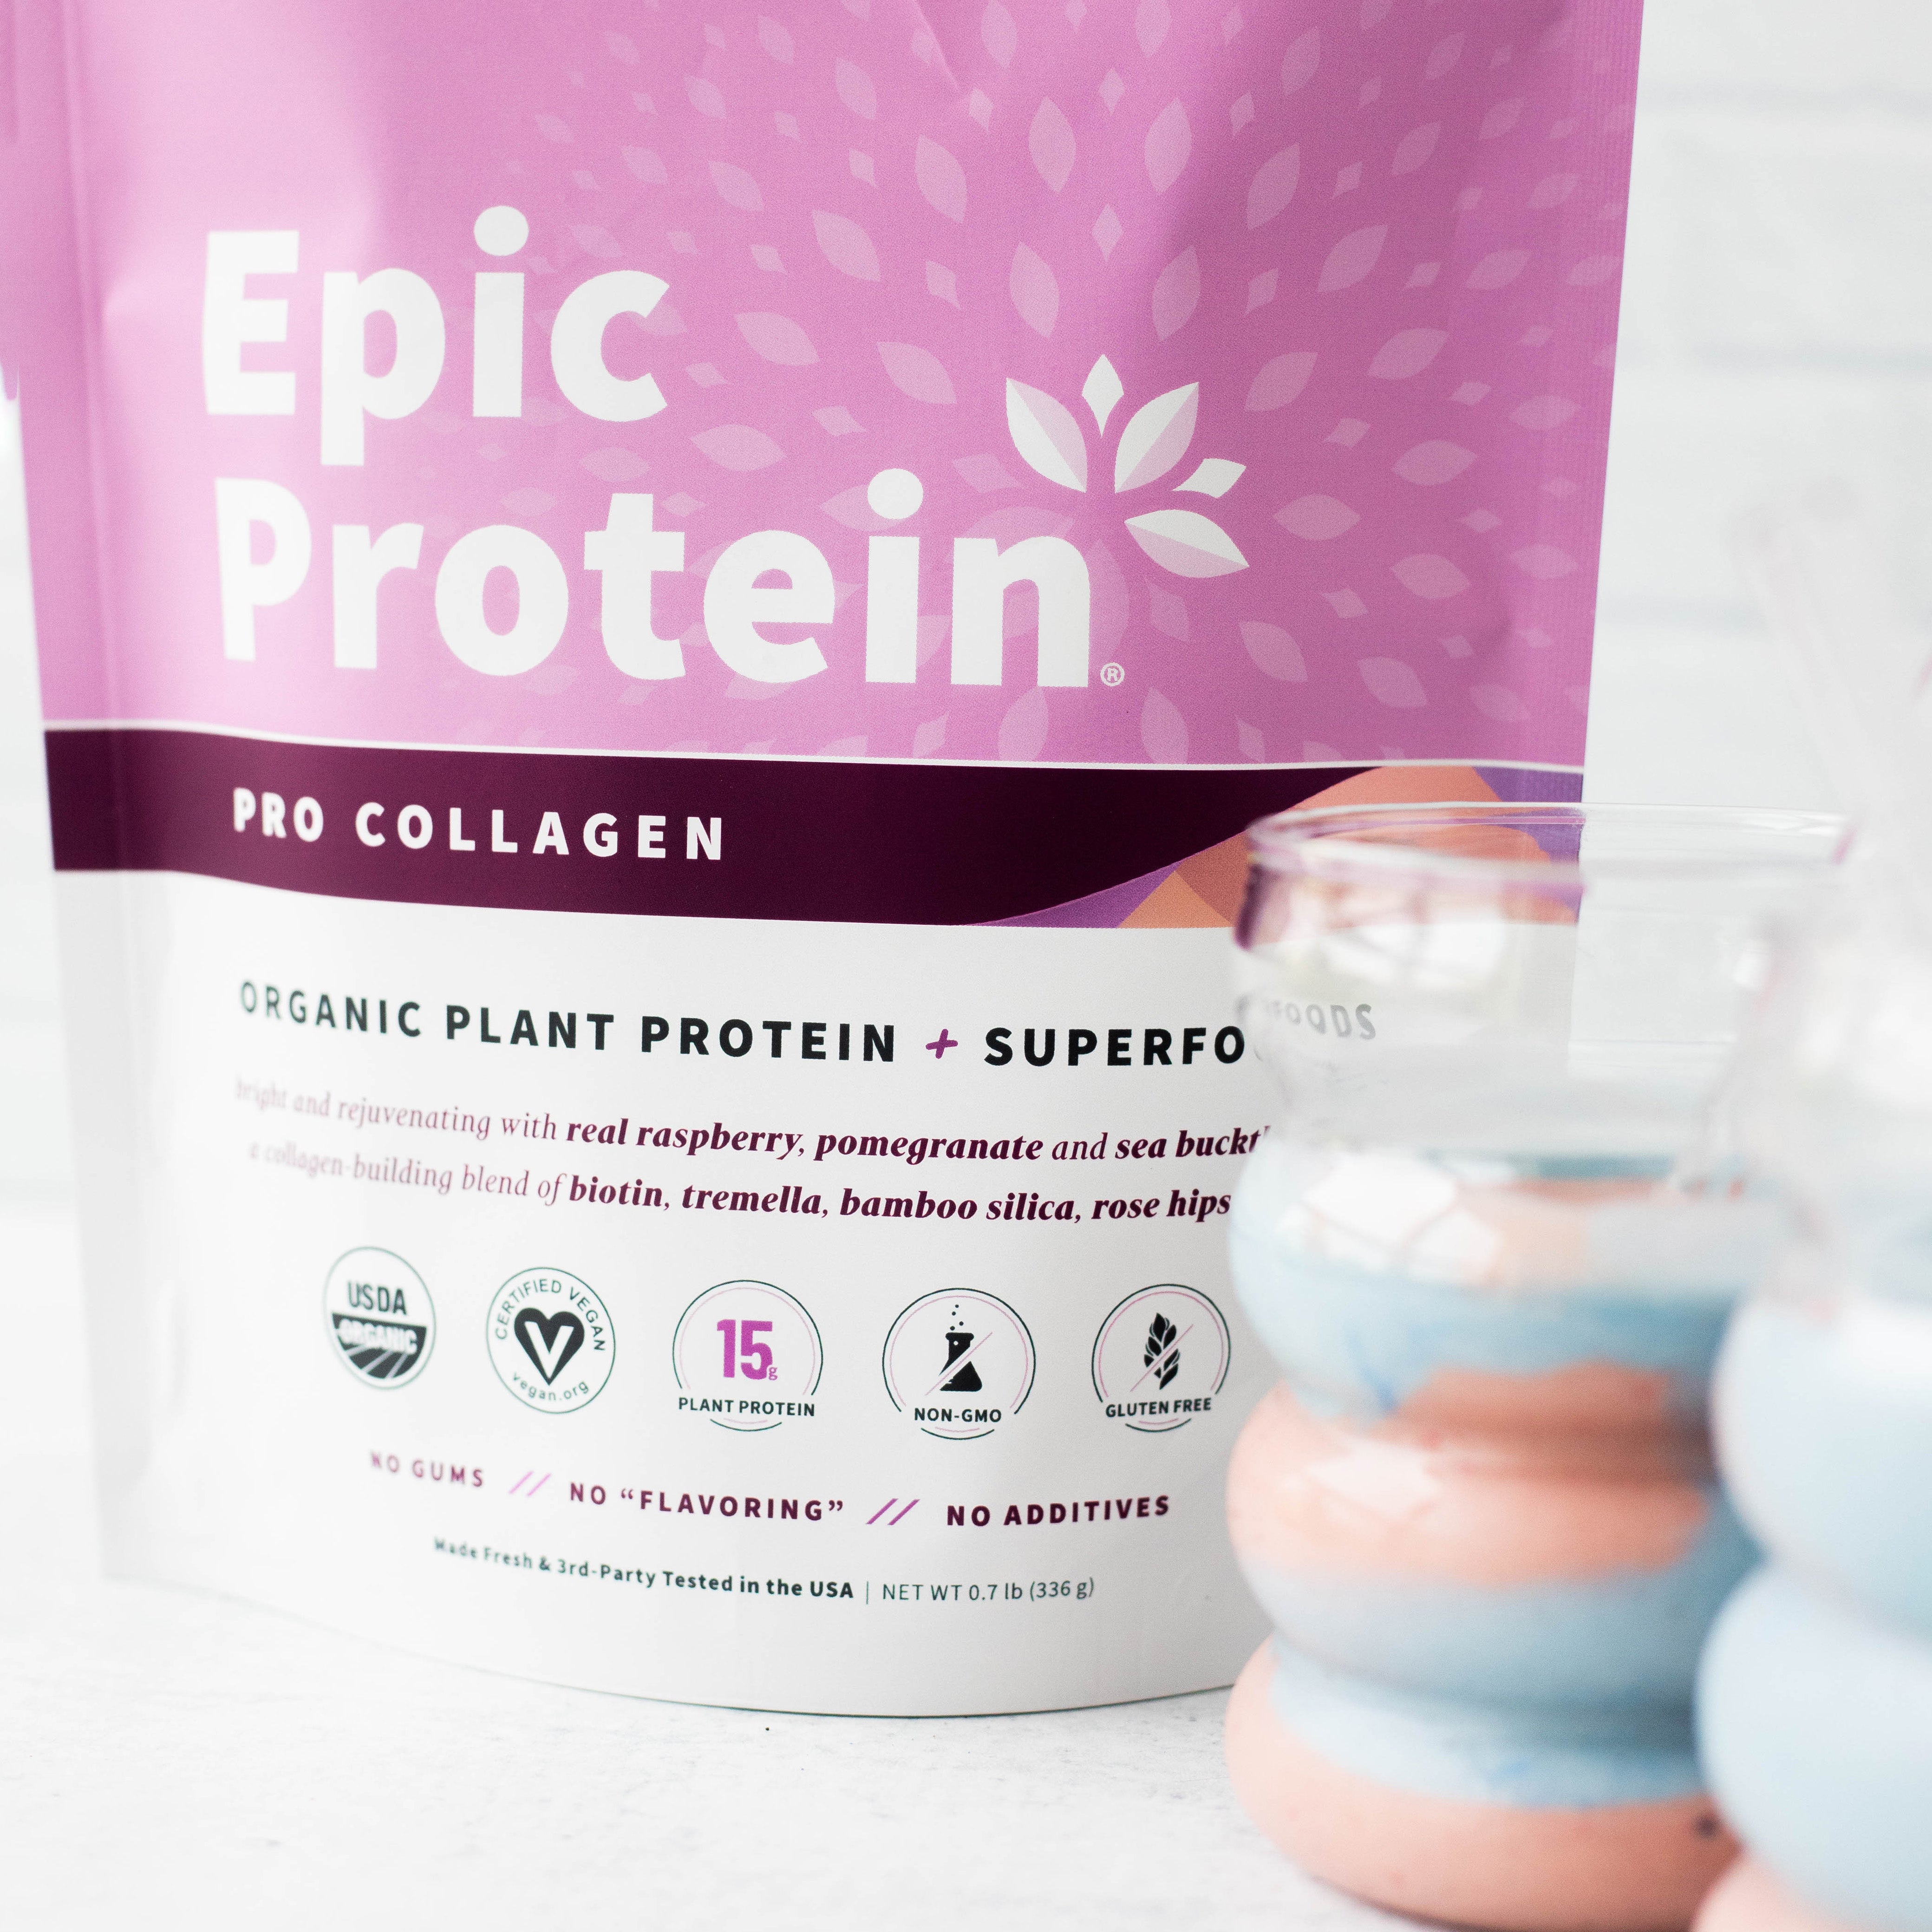 Cotton Candy Smoothie with Epic Protein Pro Collagen